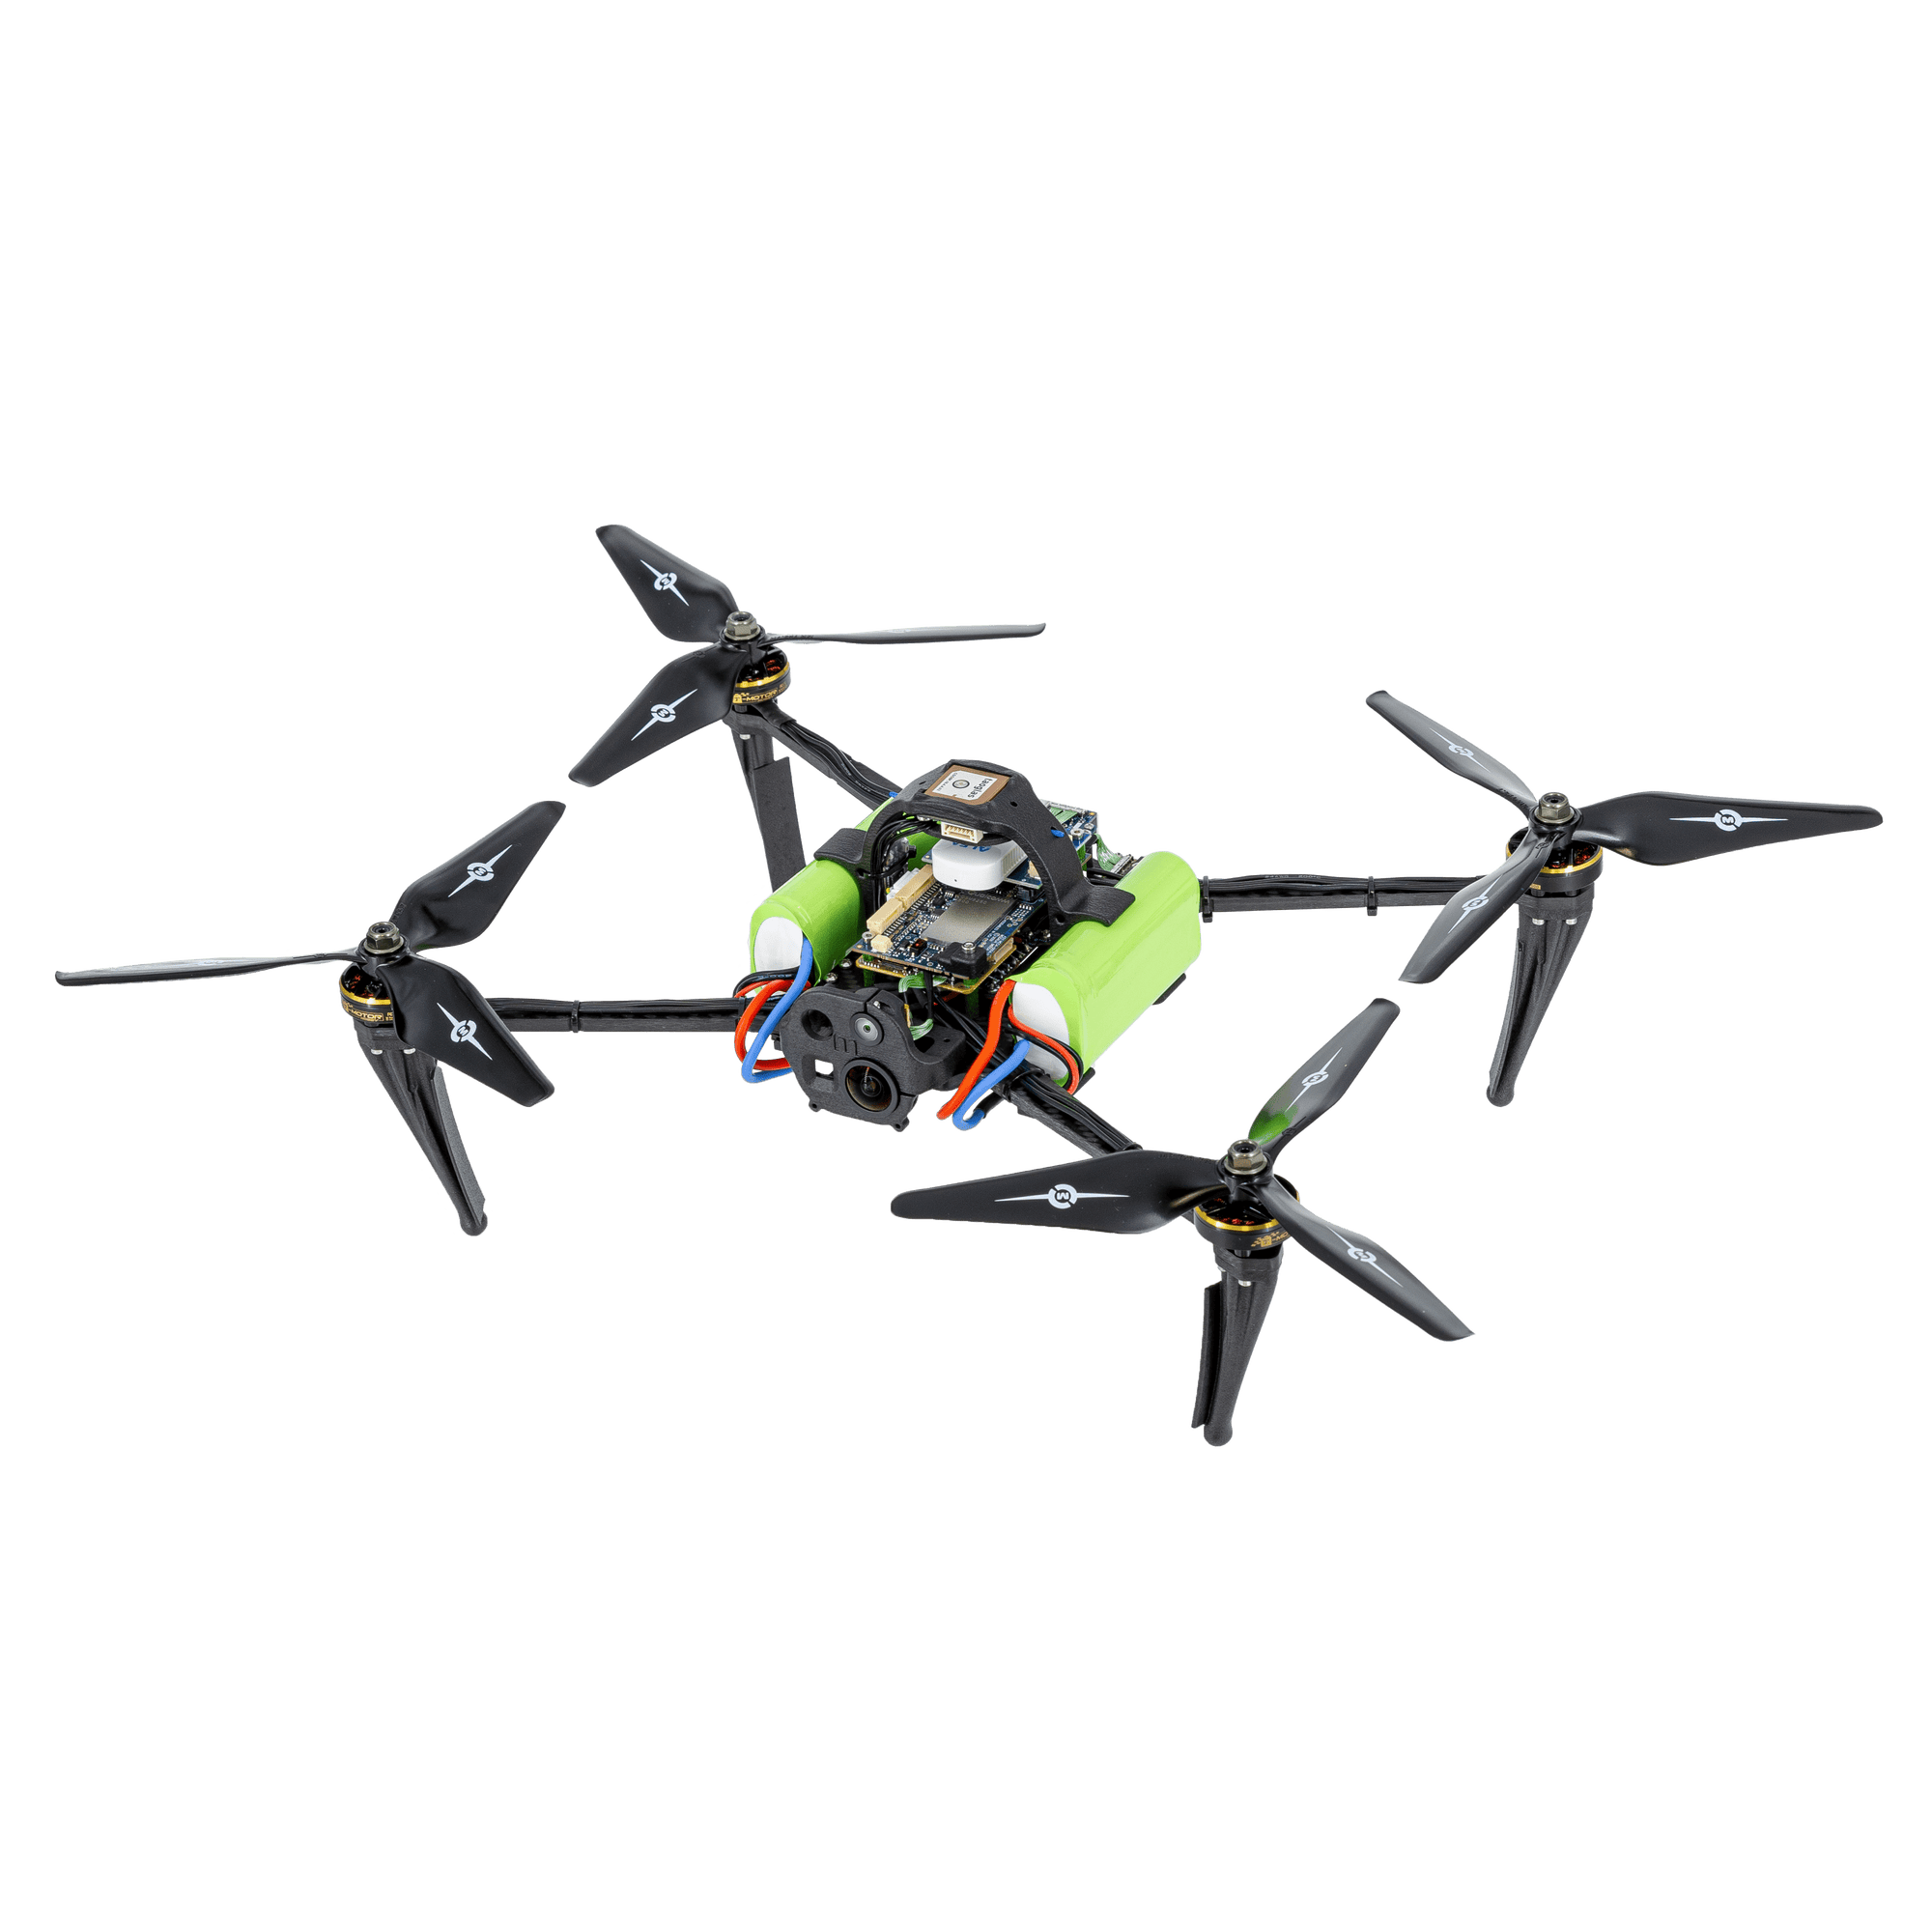 ModalAI, Inc. Drone Drone Only / WiFi and Ghost Atto (NDAA-compliant) Starling 2 Max Outdoor GPS-denied Development Drone